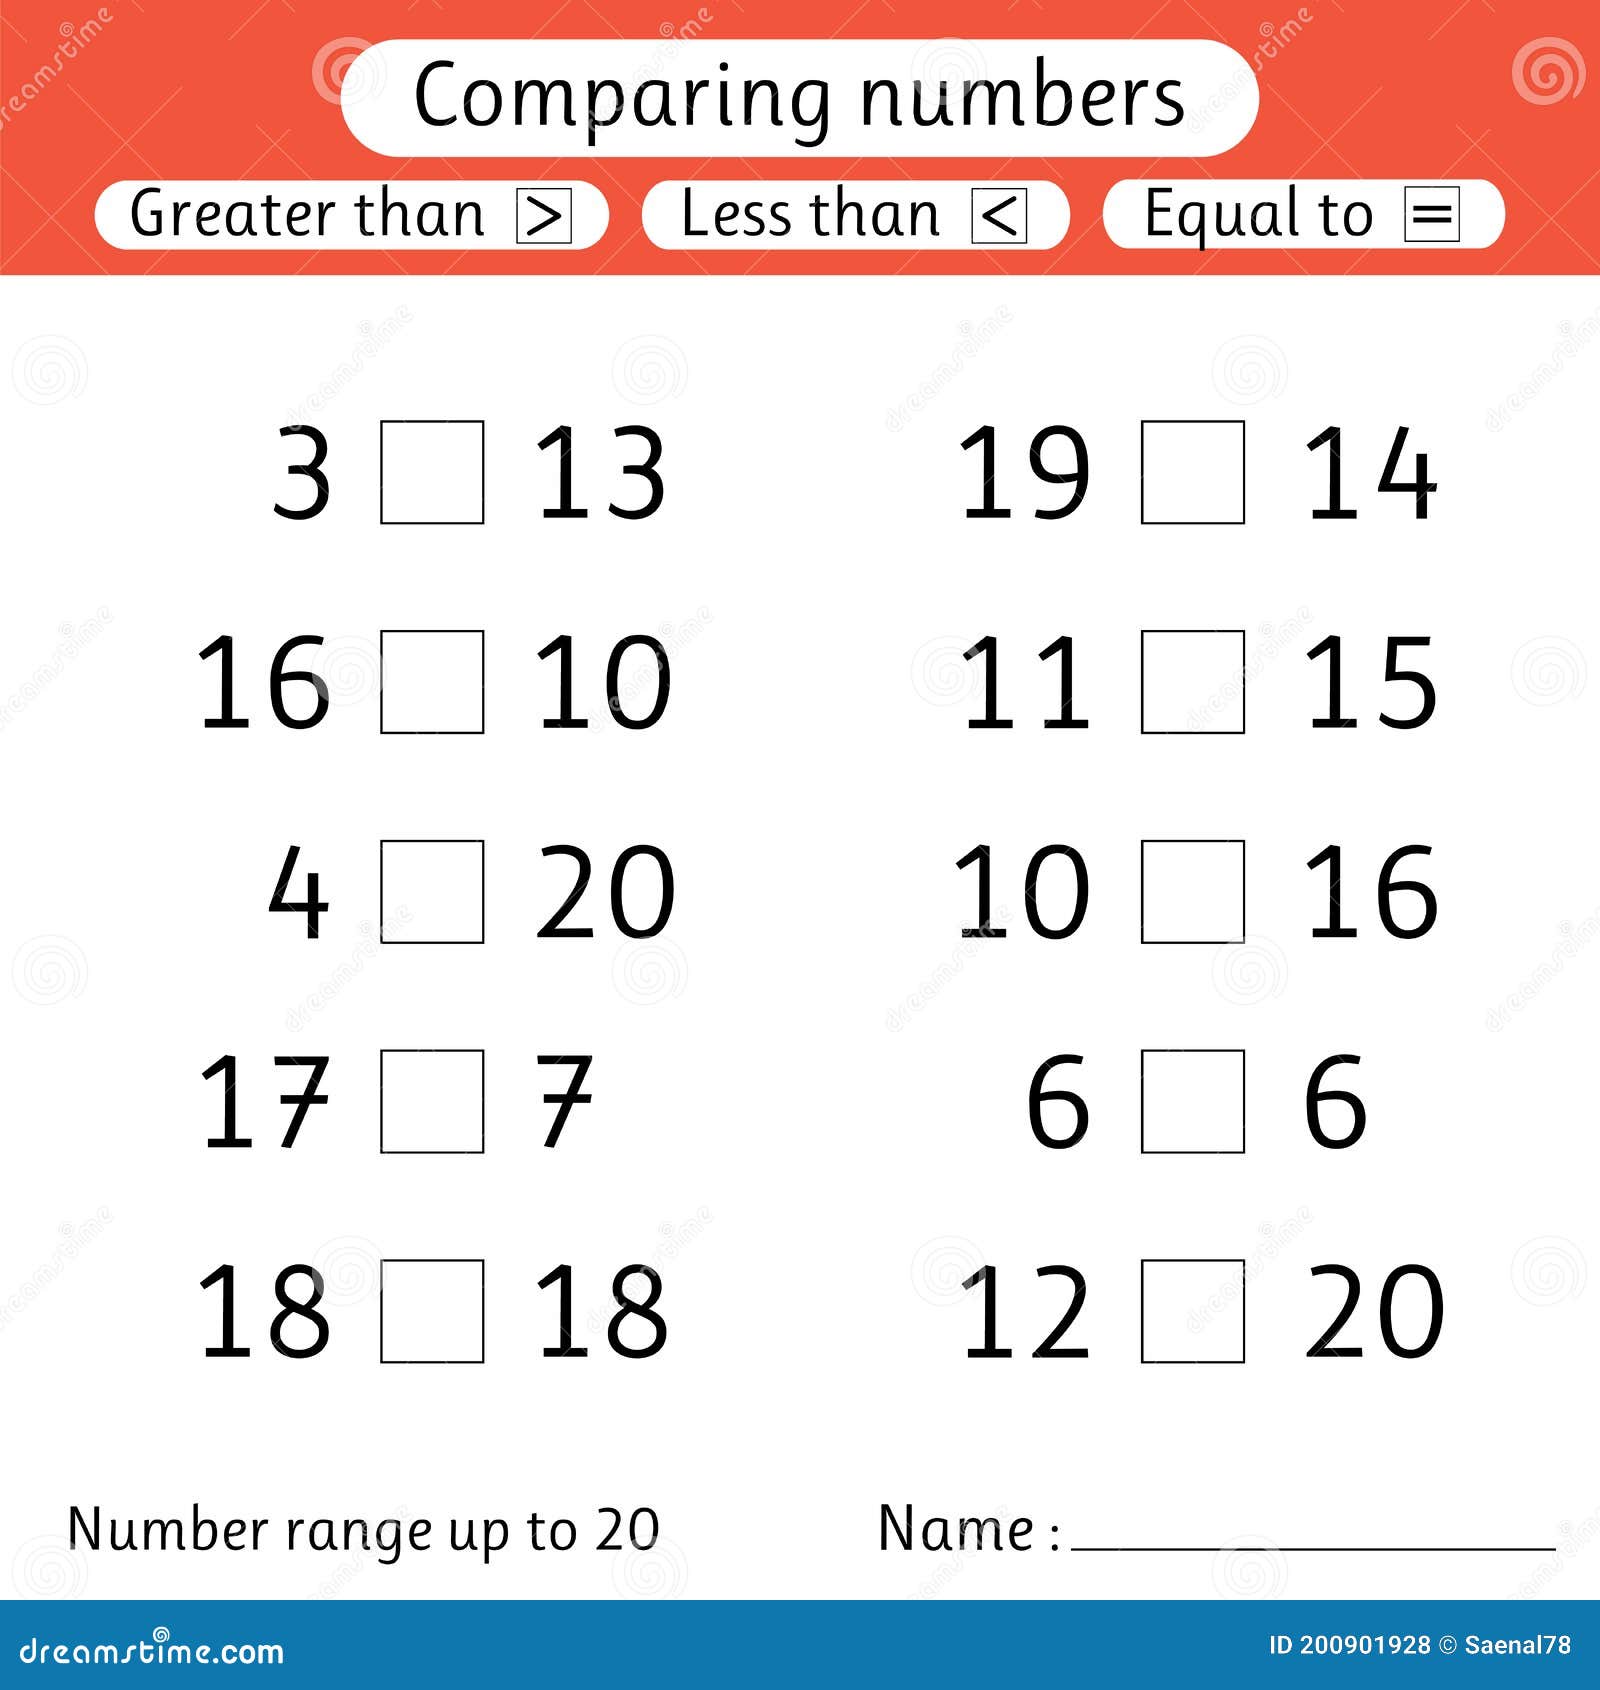 comparing-numbers-less-than-greater-than-equal-to-number-range-up